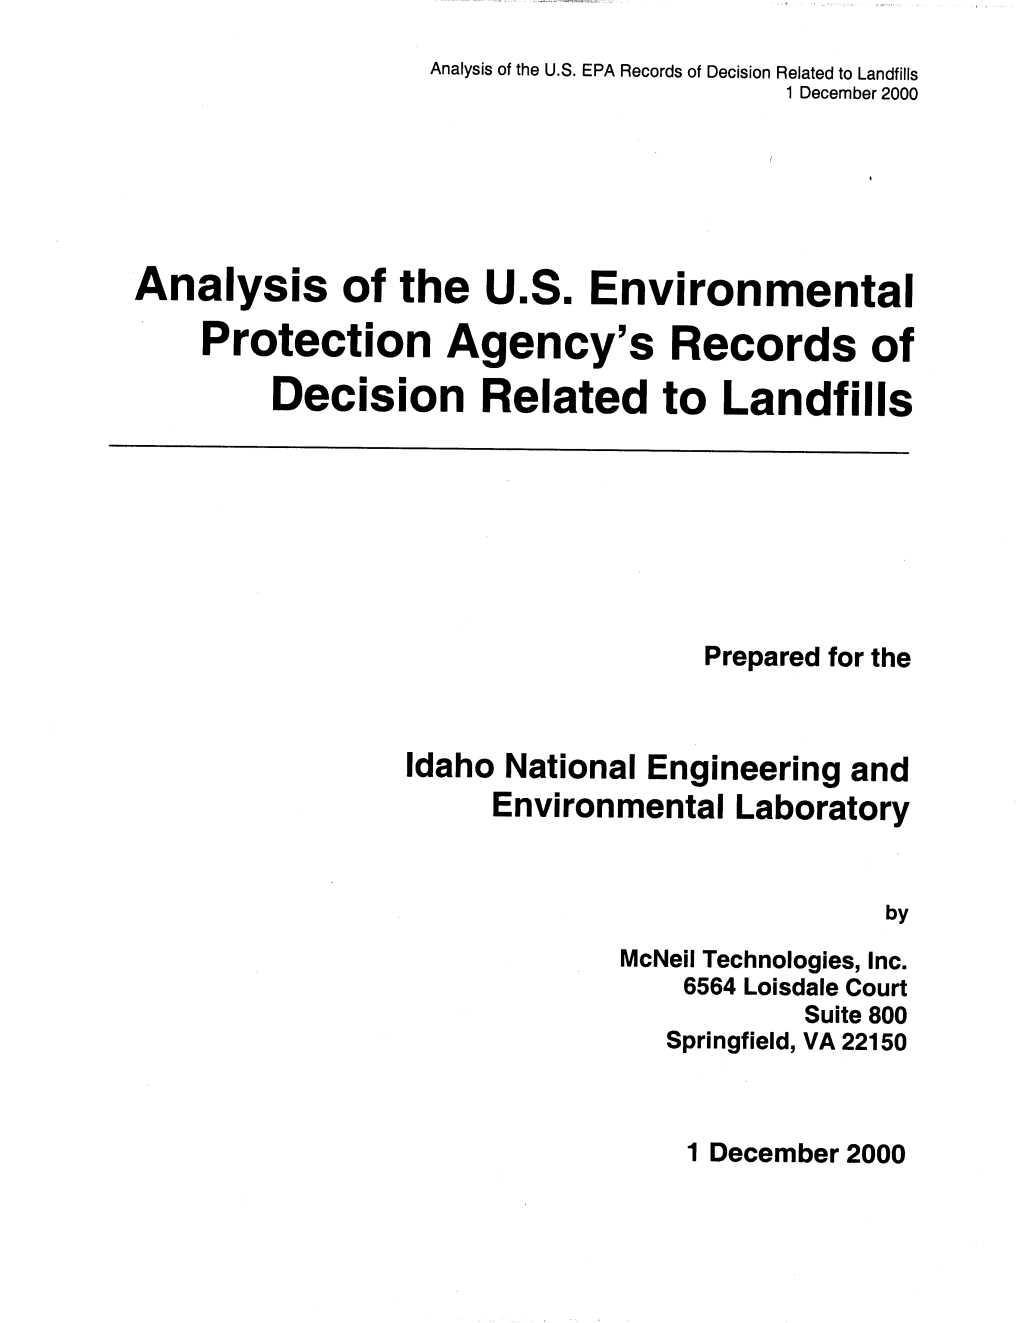 Analysis of the U.S. Environmental Protection Agency's Records of Decision Related to Landfills